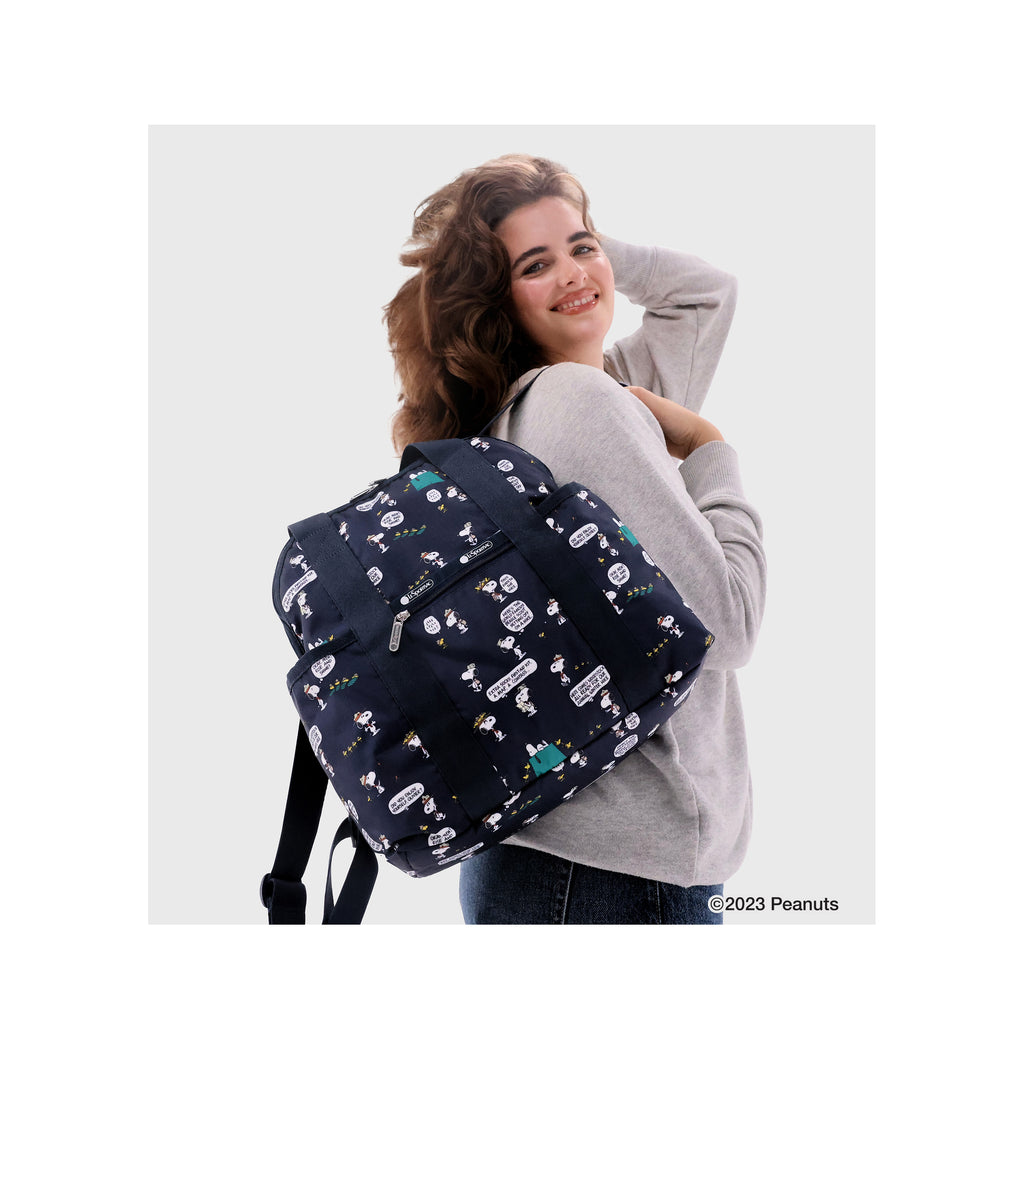 Double Trouble Backpack - 24819959234608